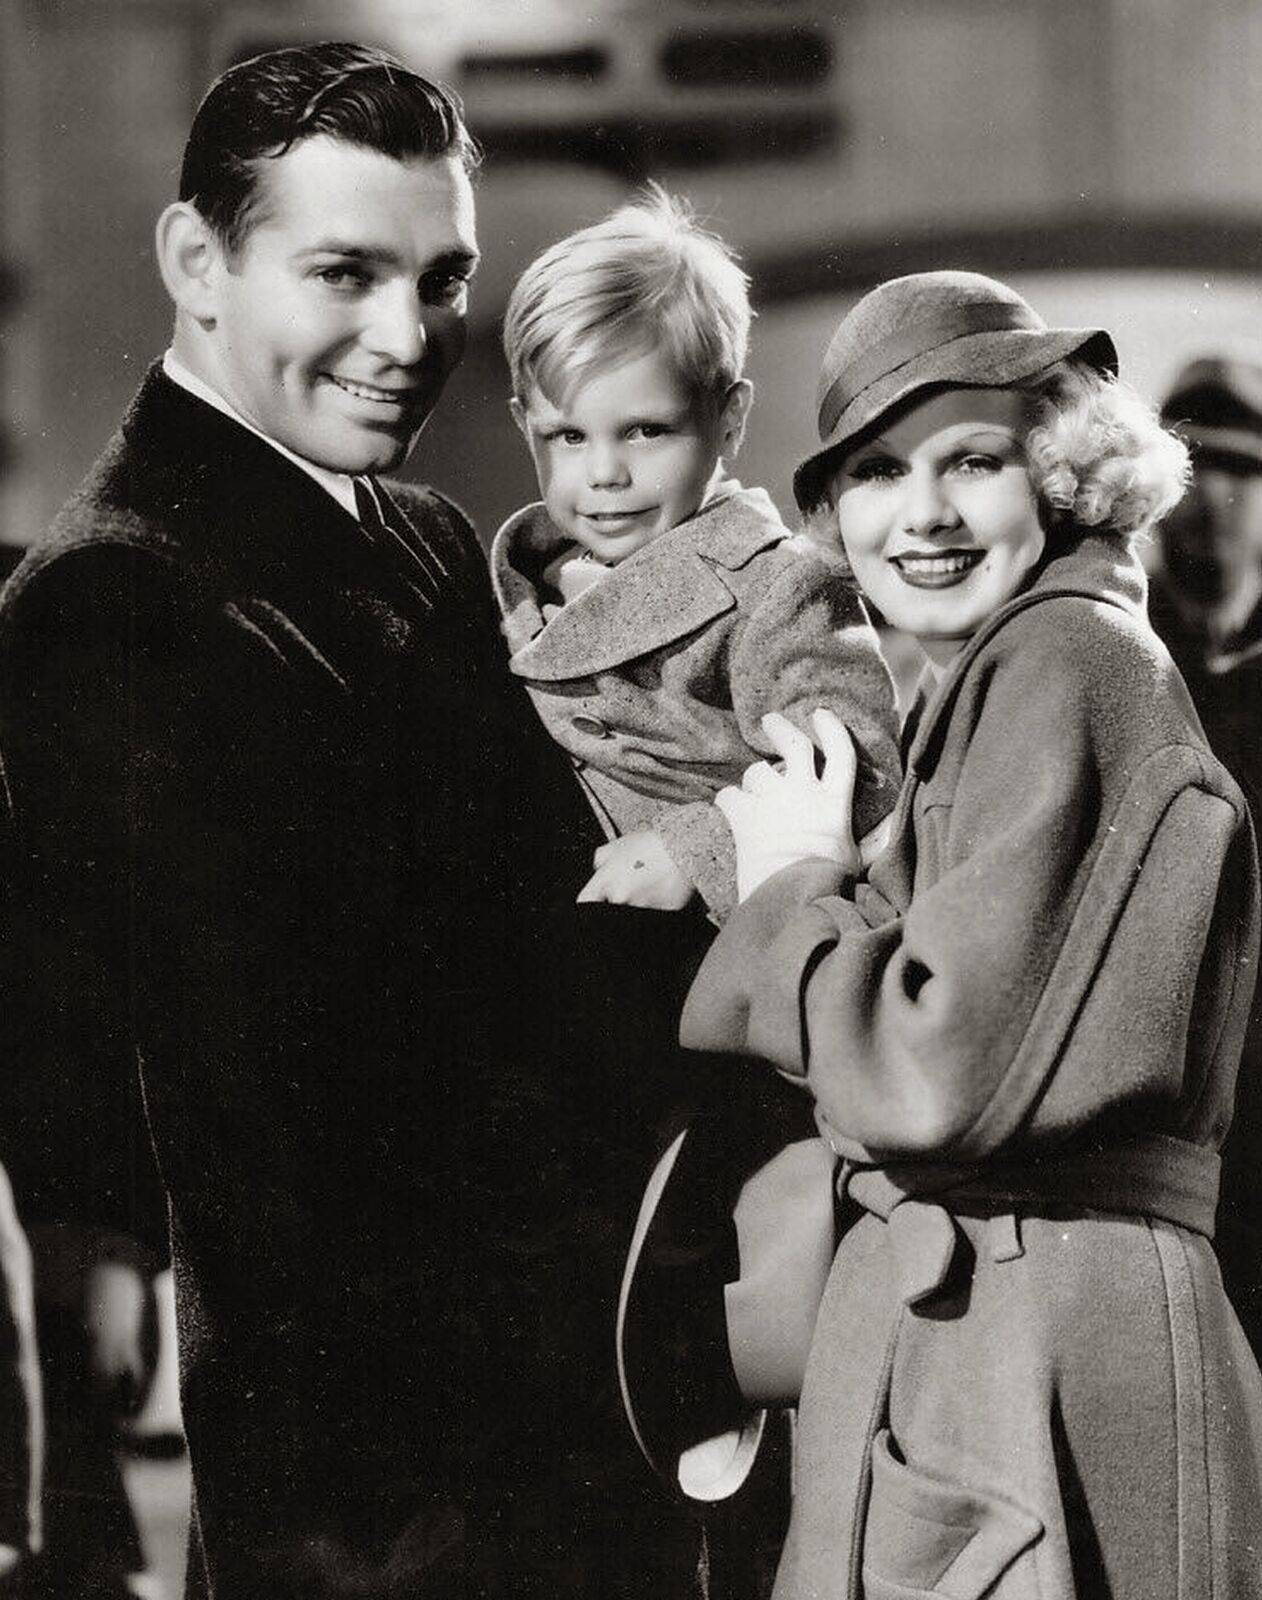 1932 CLARK GABLE & JEAN HARLOW in HOLD YOUR MAN  Photo (203-T )